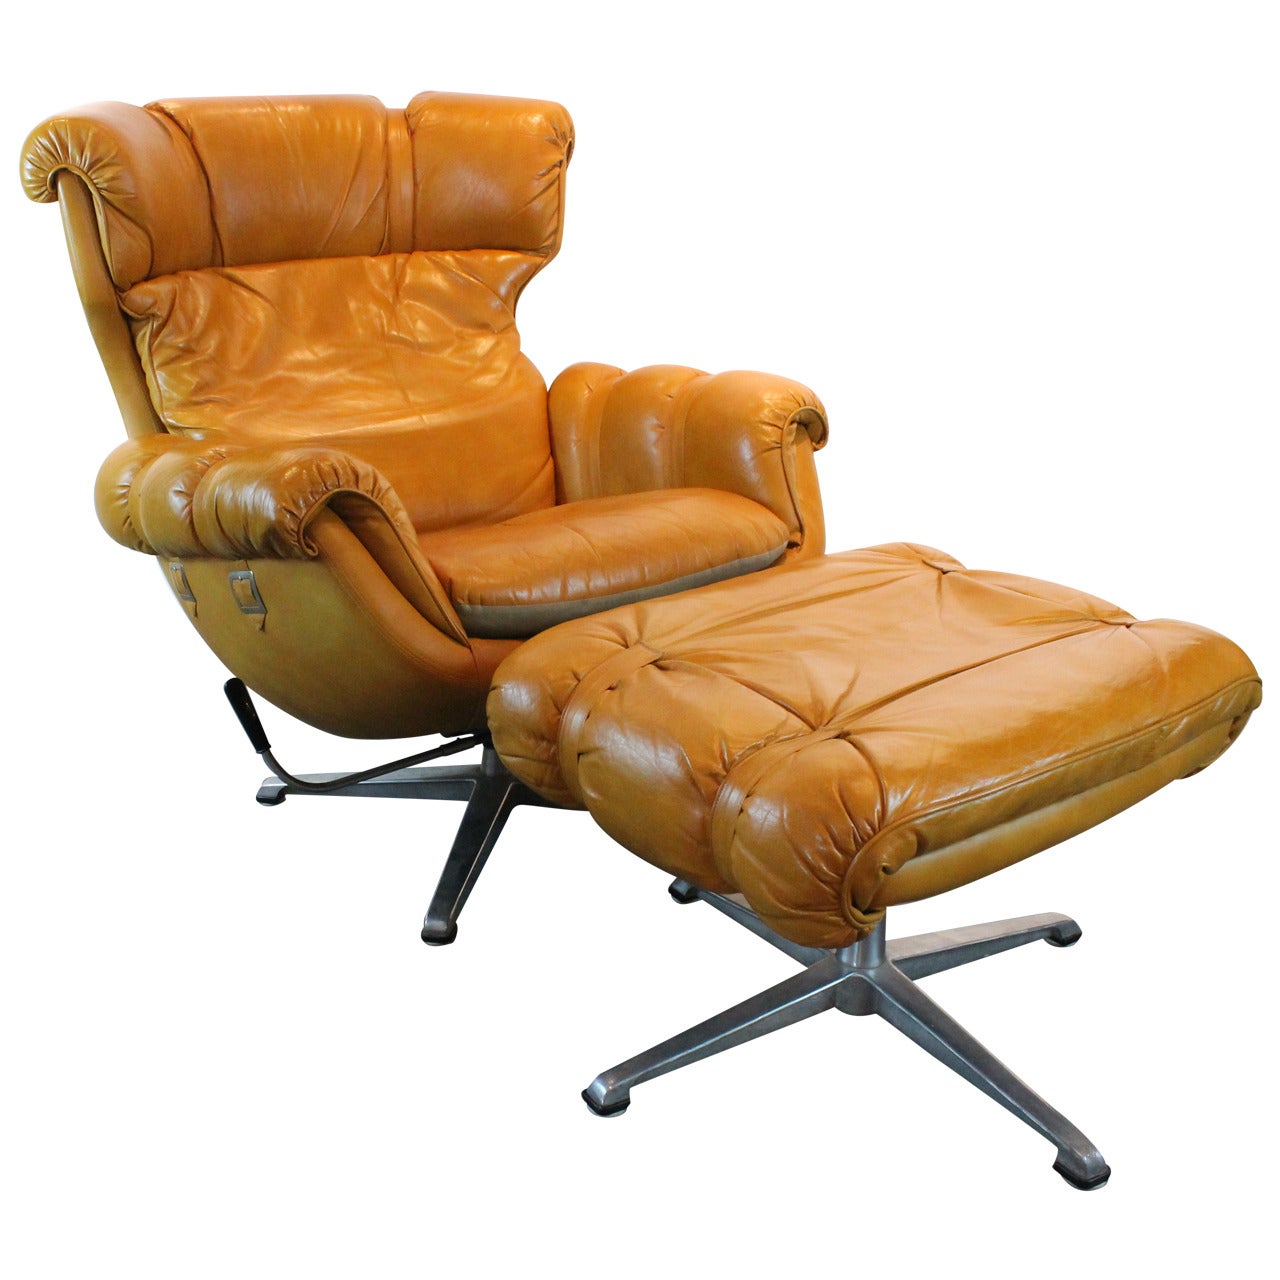 Overman Egg Form Swiveling Lounge Chair and Ottoman For Sale